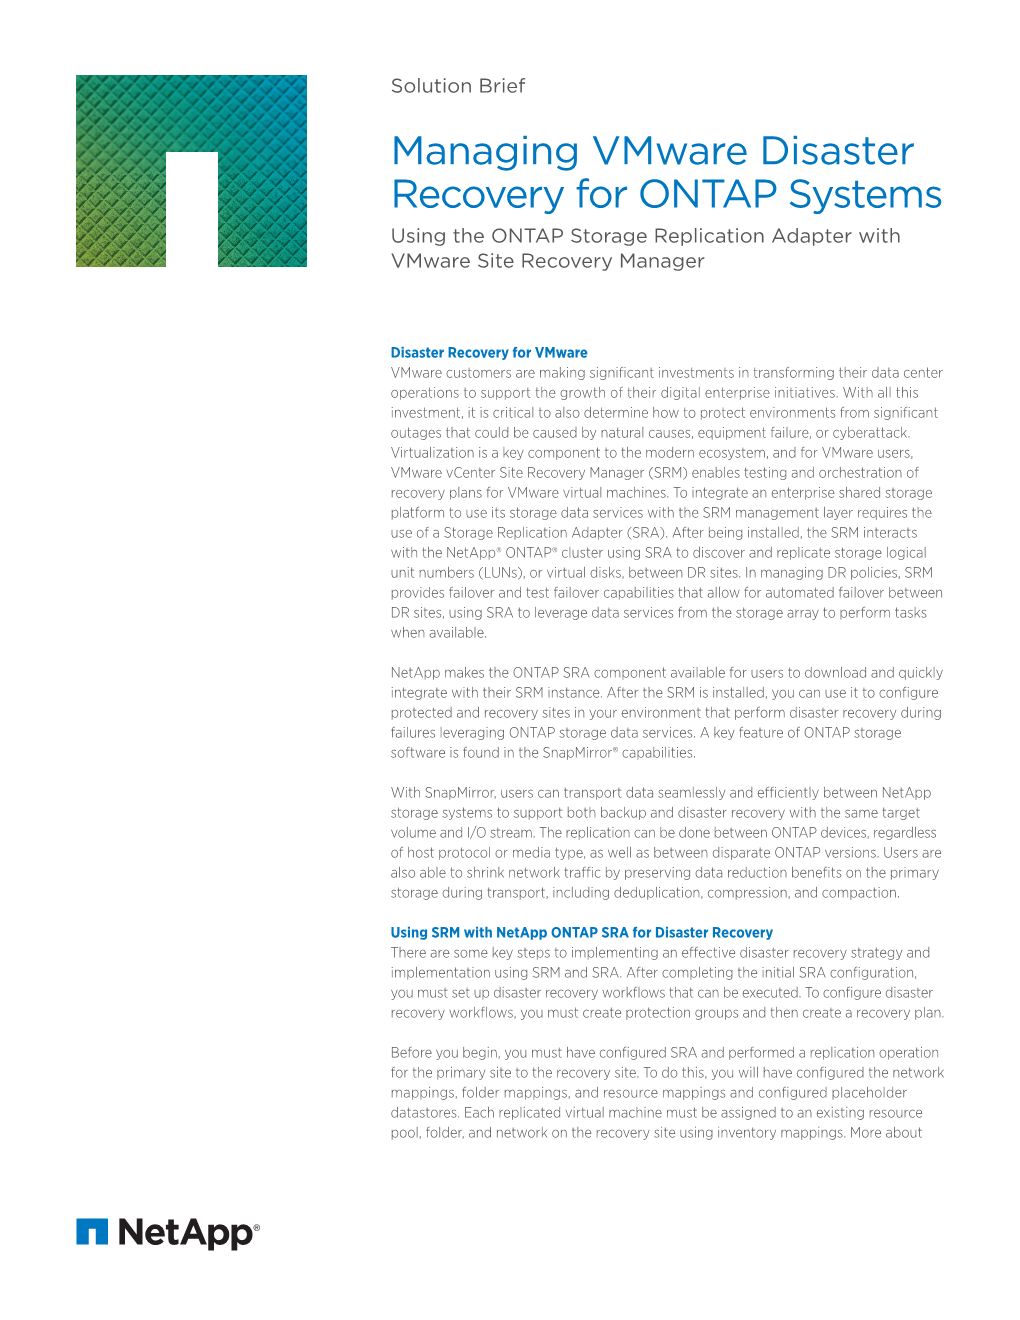 Managing Vmware Disaster Recovery for ONTAP Systems Using the ONTAP Storage Replication Adapter with Vmware Site Recovery Manager